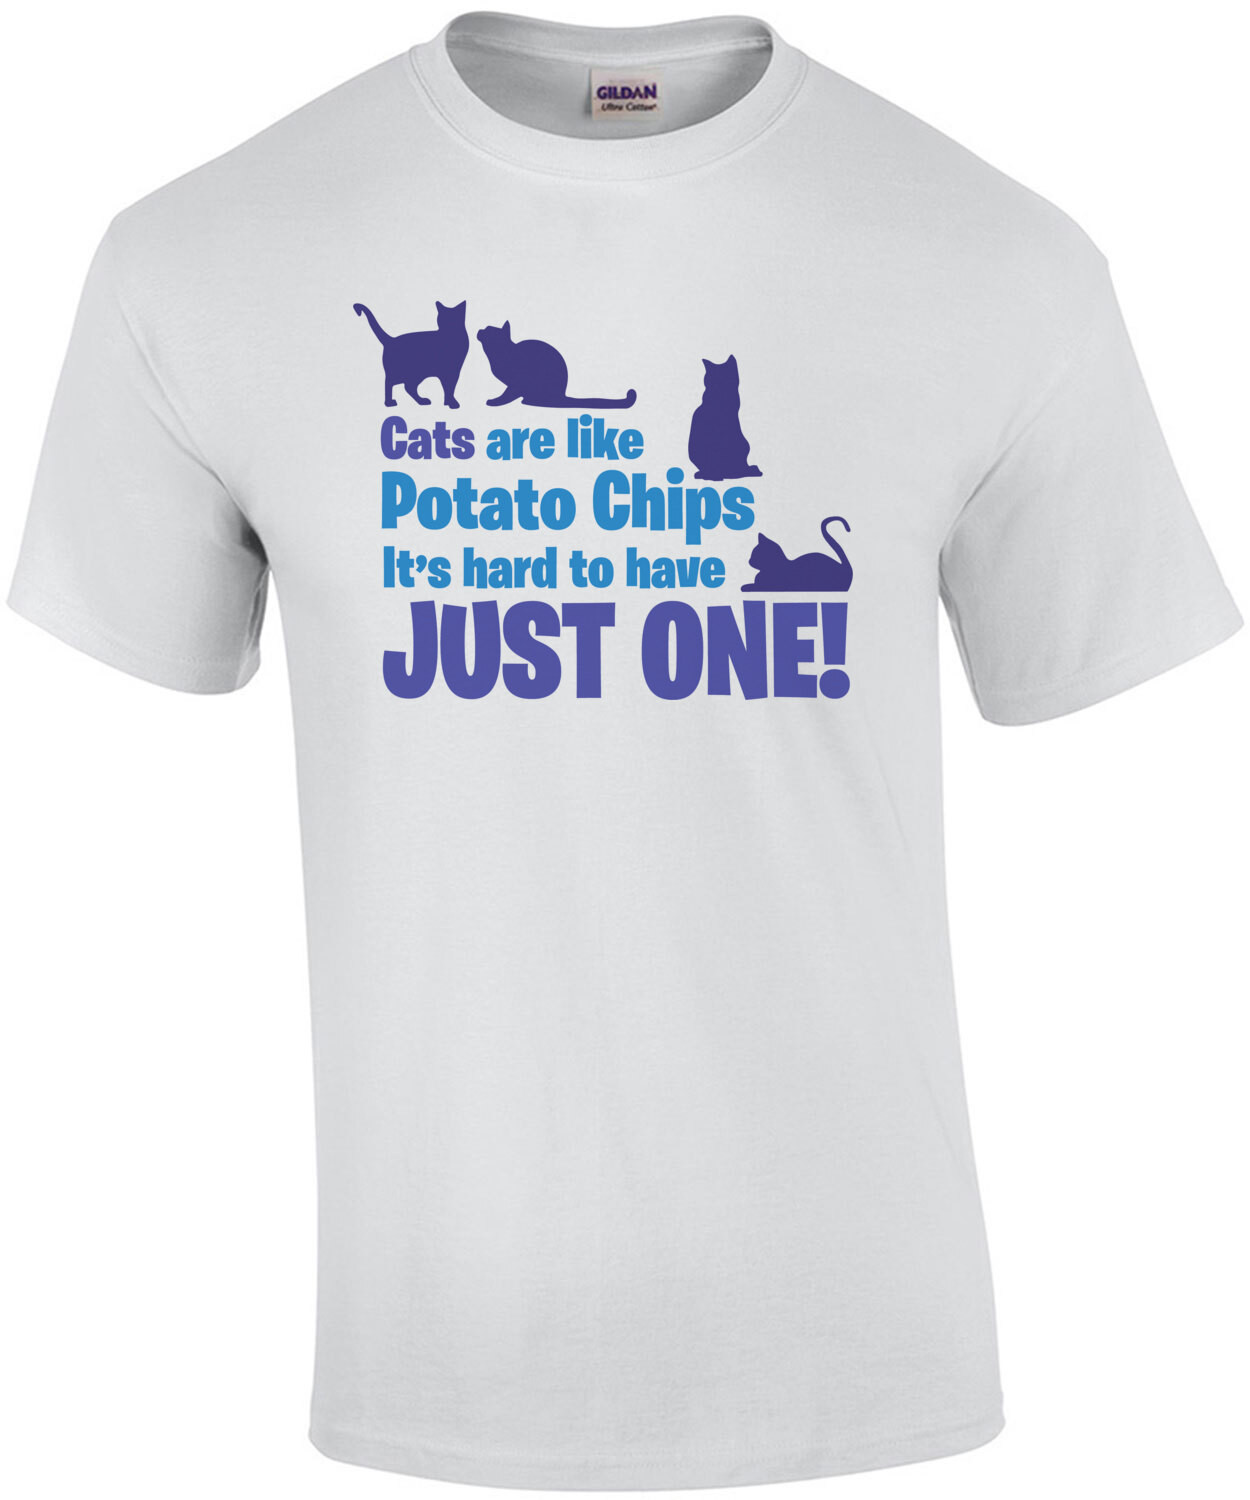 Cats are like potato chips - It's hard to have just one - cat t-shirt